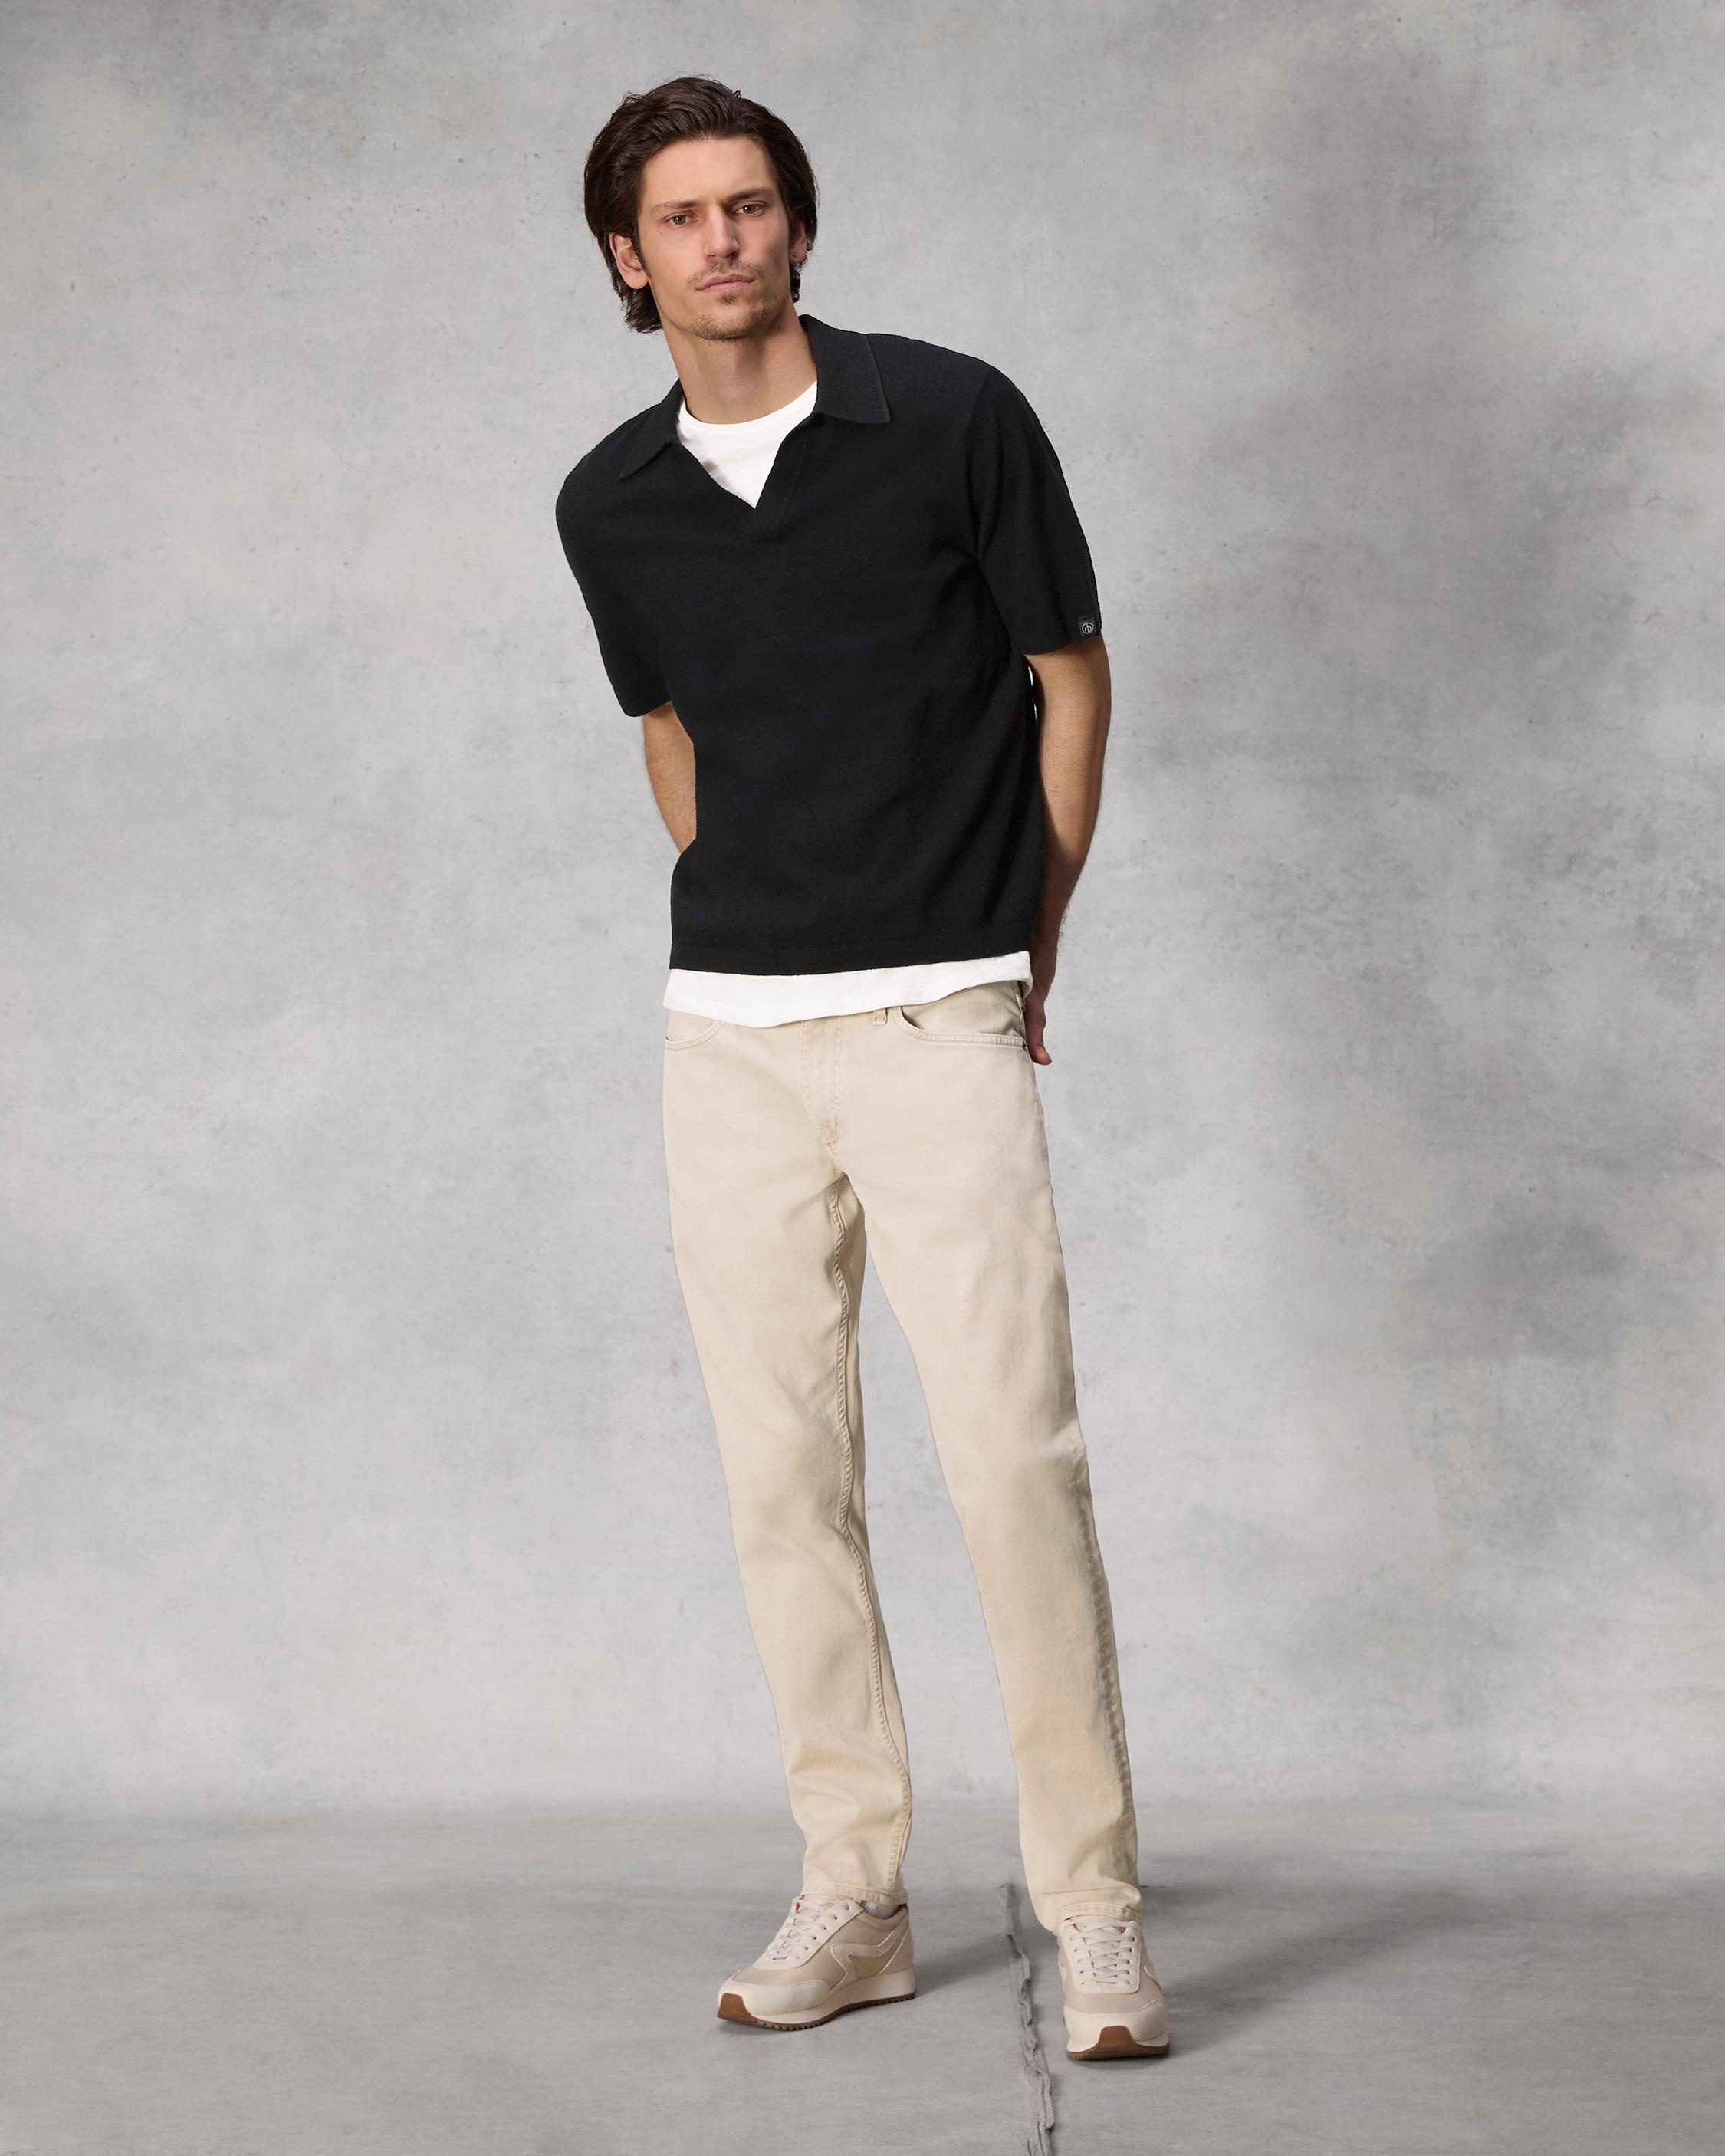 Johnny Zuma Toweling Polo
Classic Fit - 3